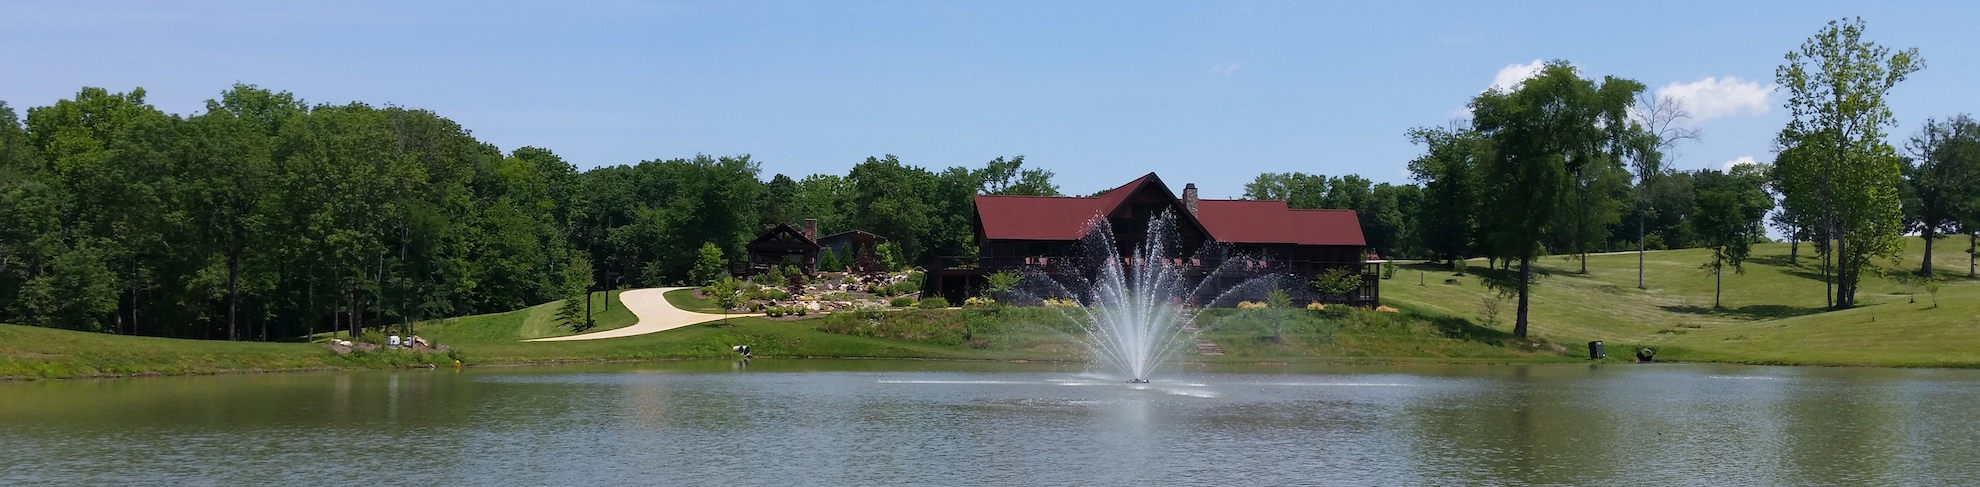 Pond Maintenance Aeration, Fountains, Weed Control by Pond Lake Management